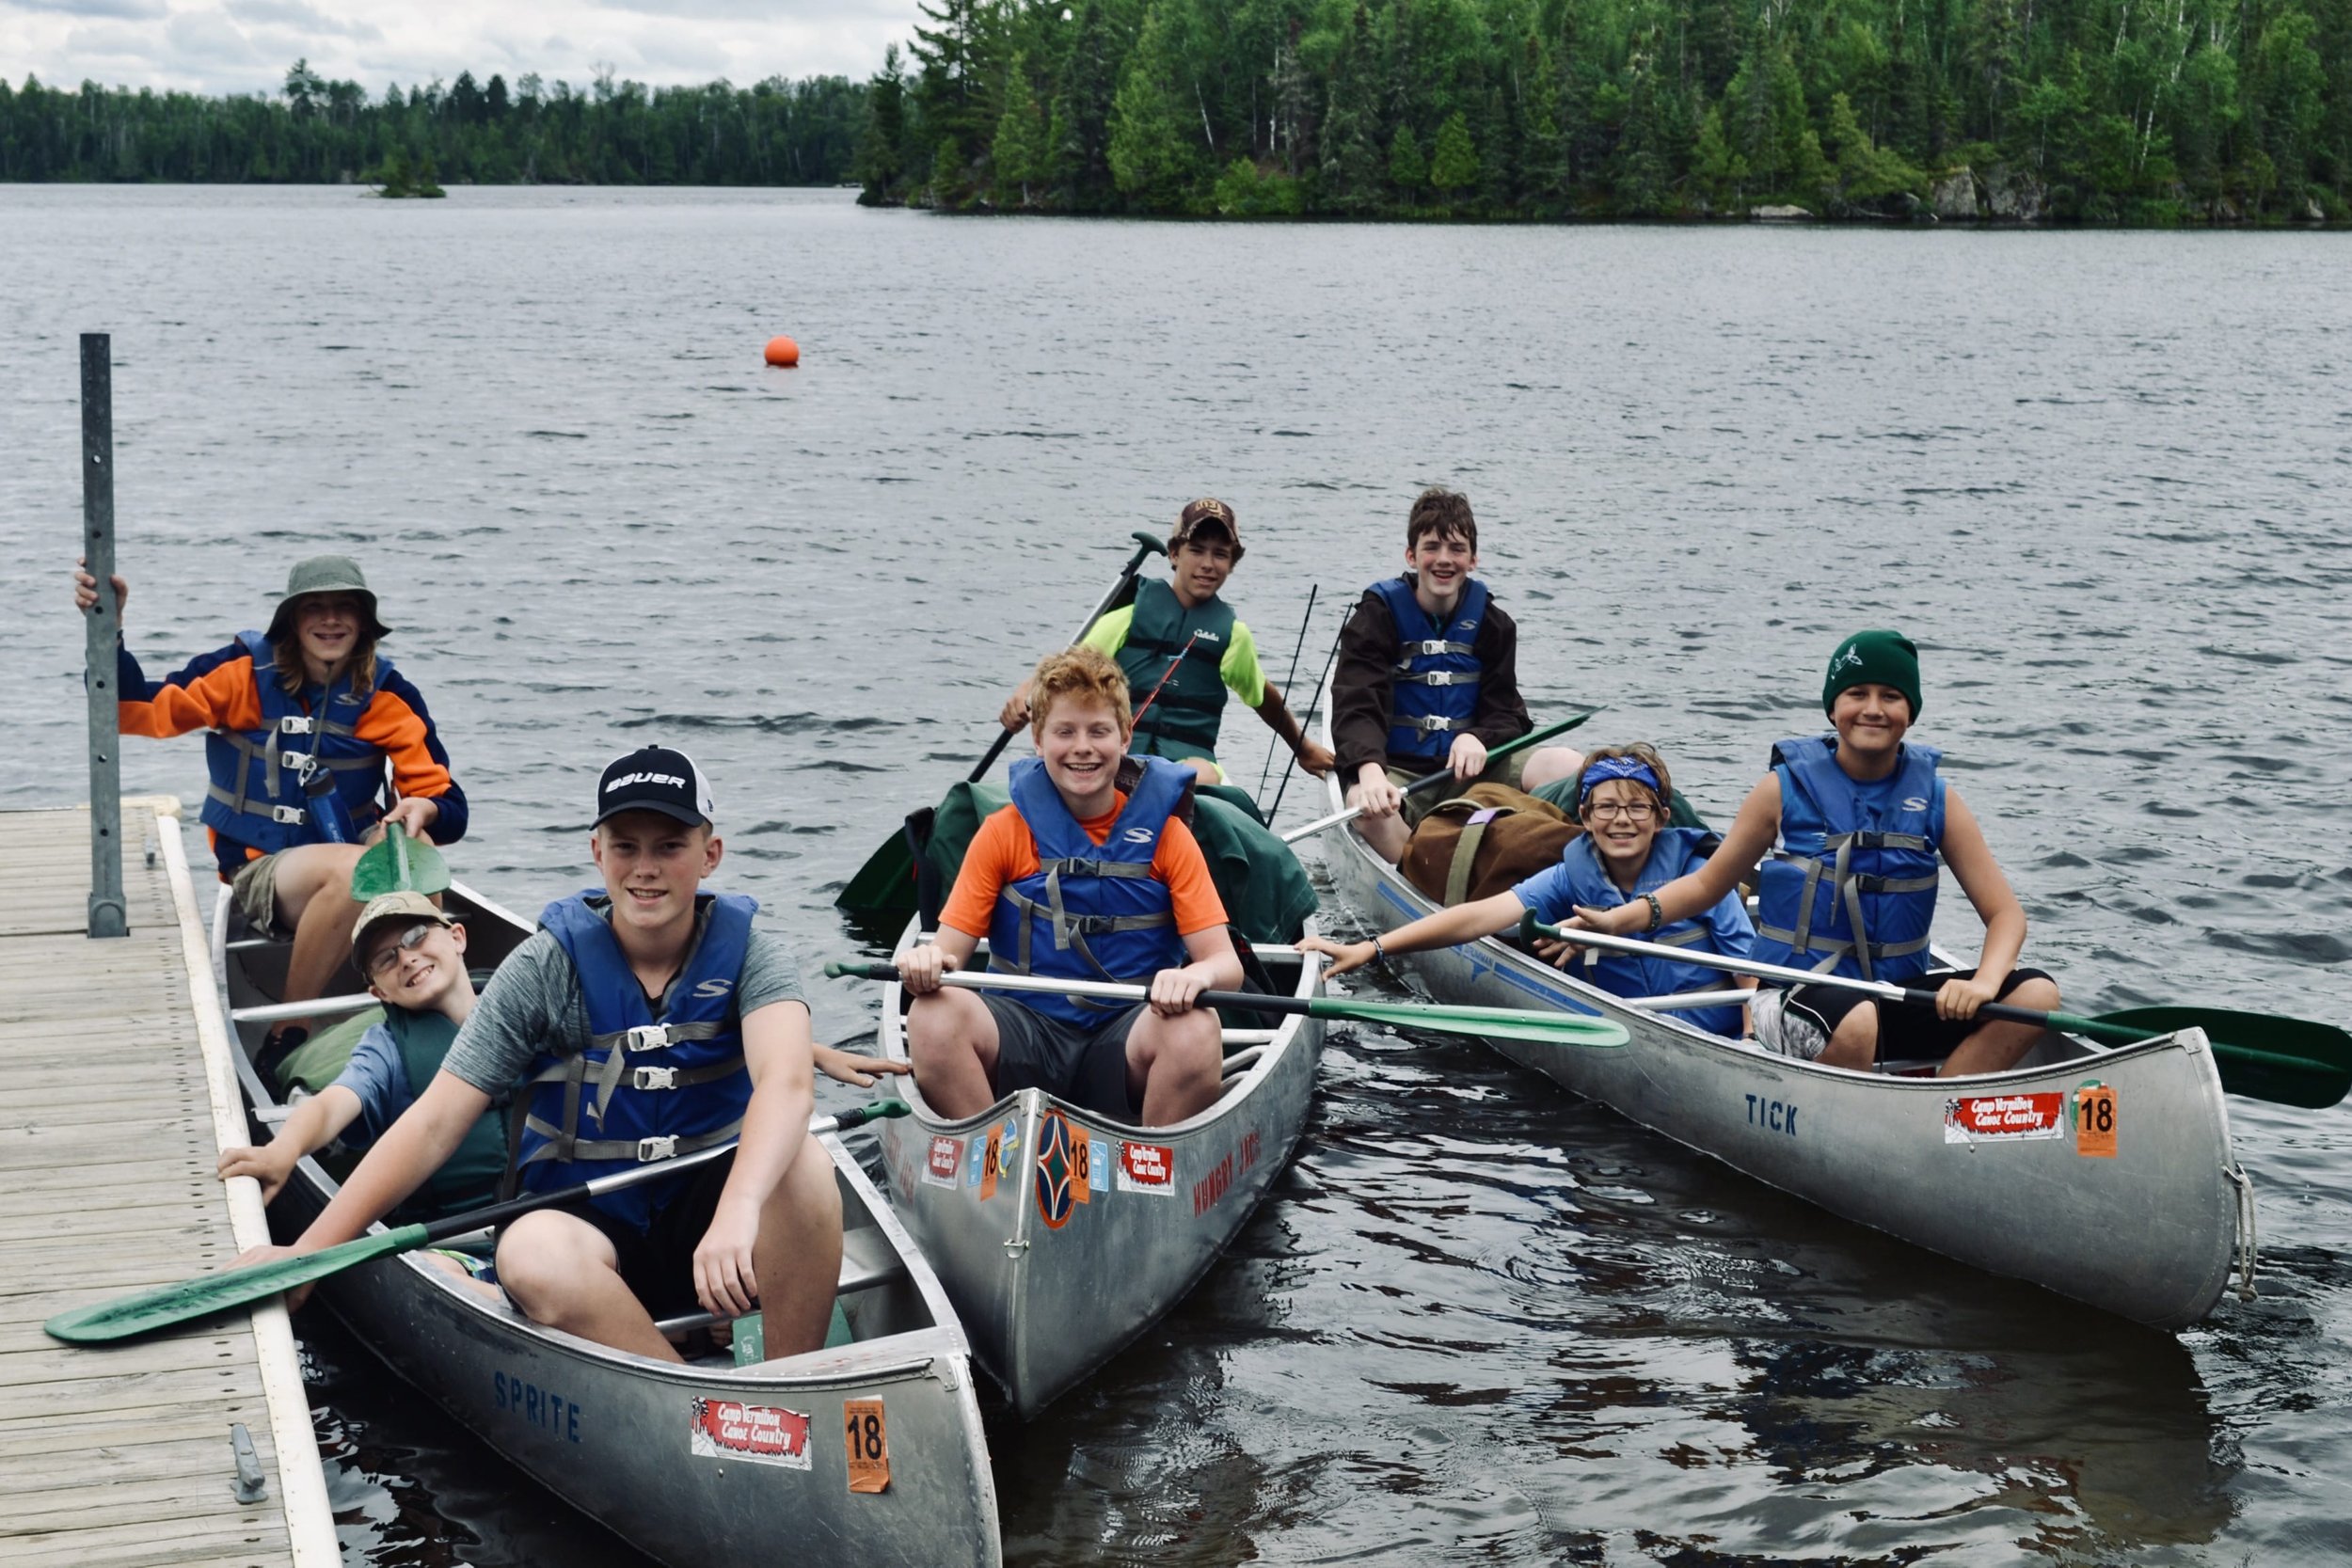 WILDERNESS_good-group-pic-in-canoes-EDITED.jpeg